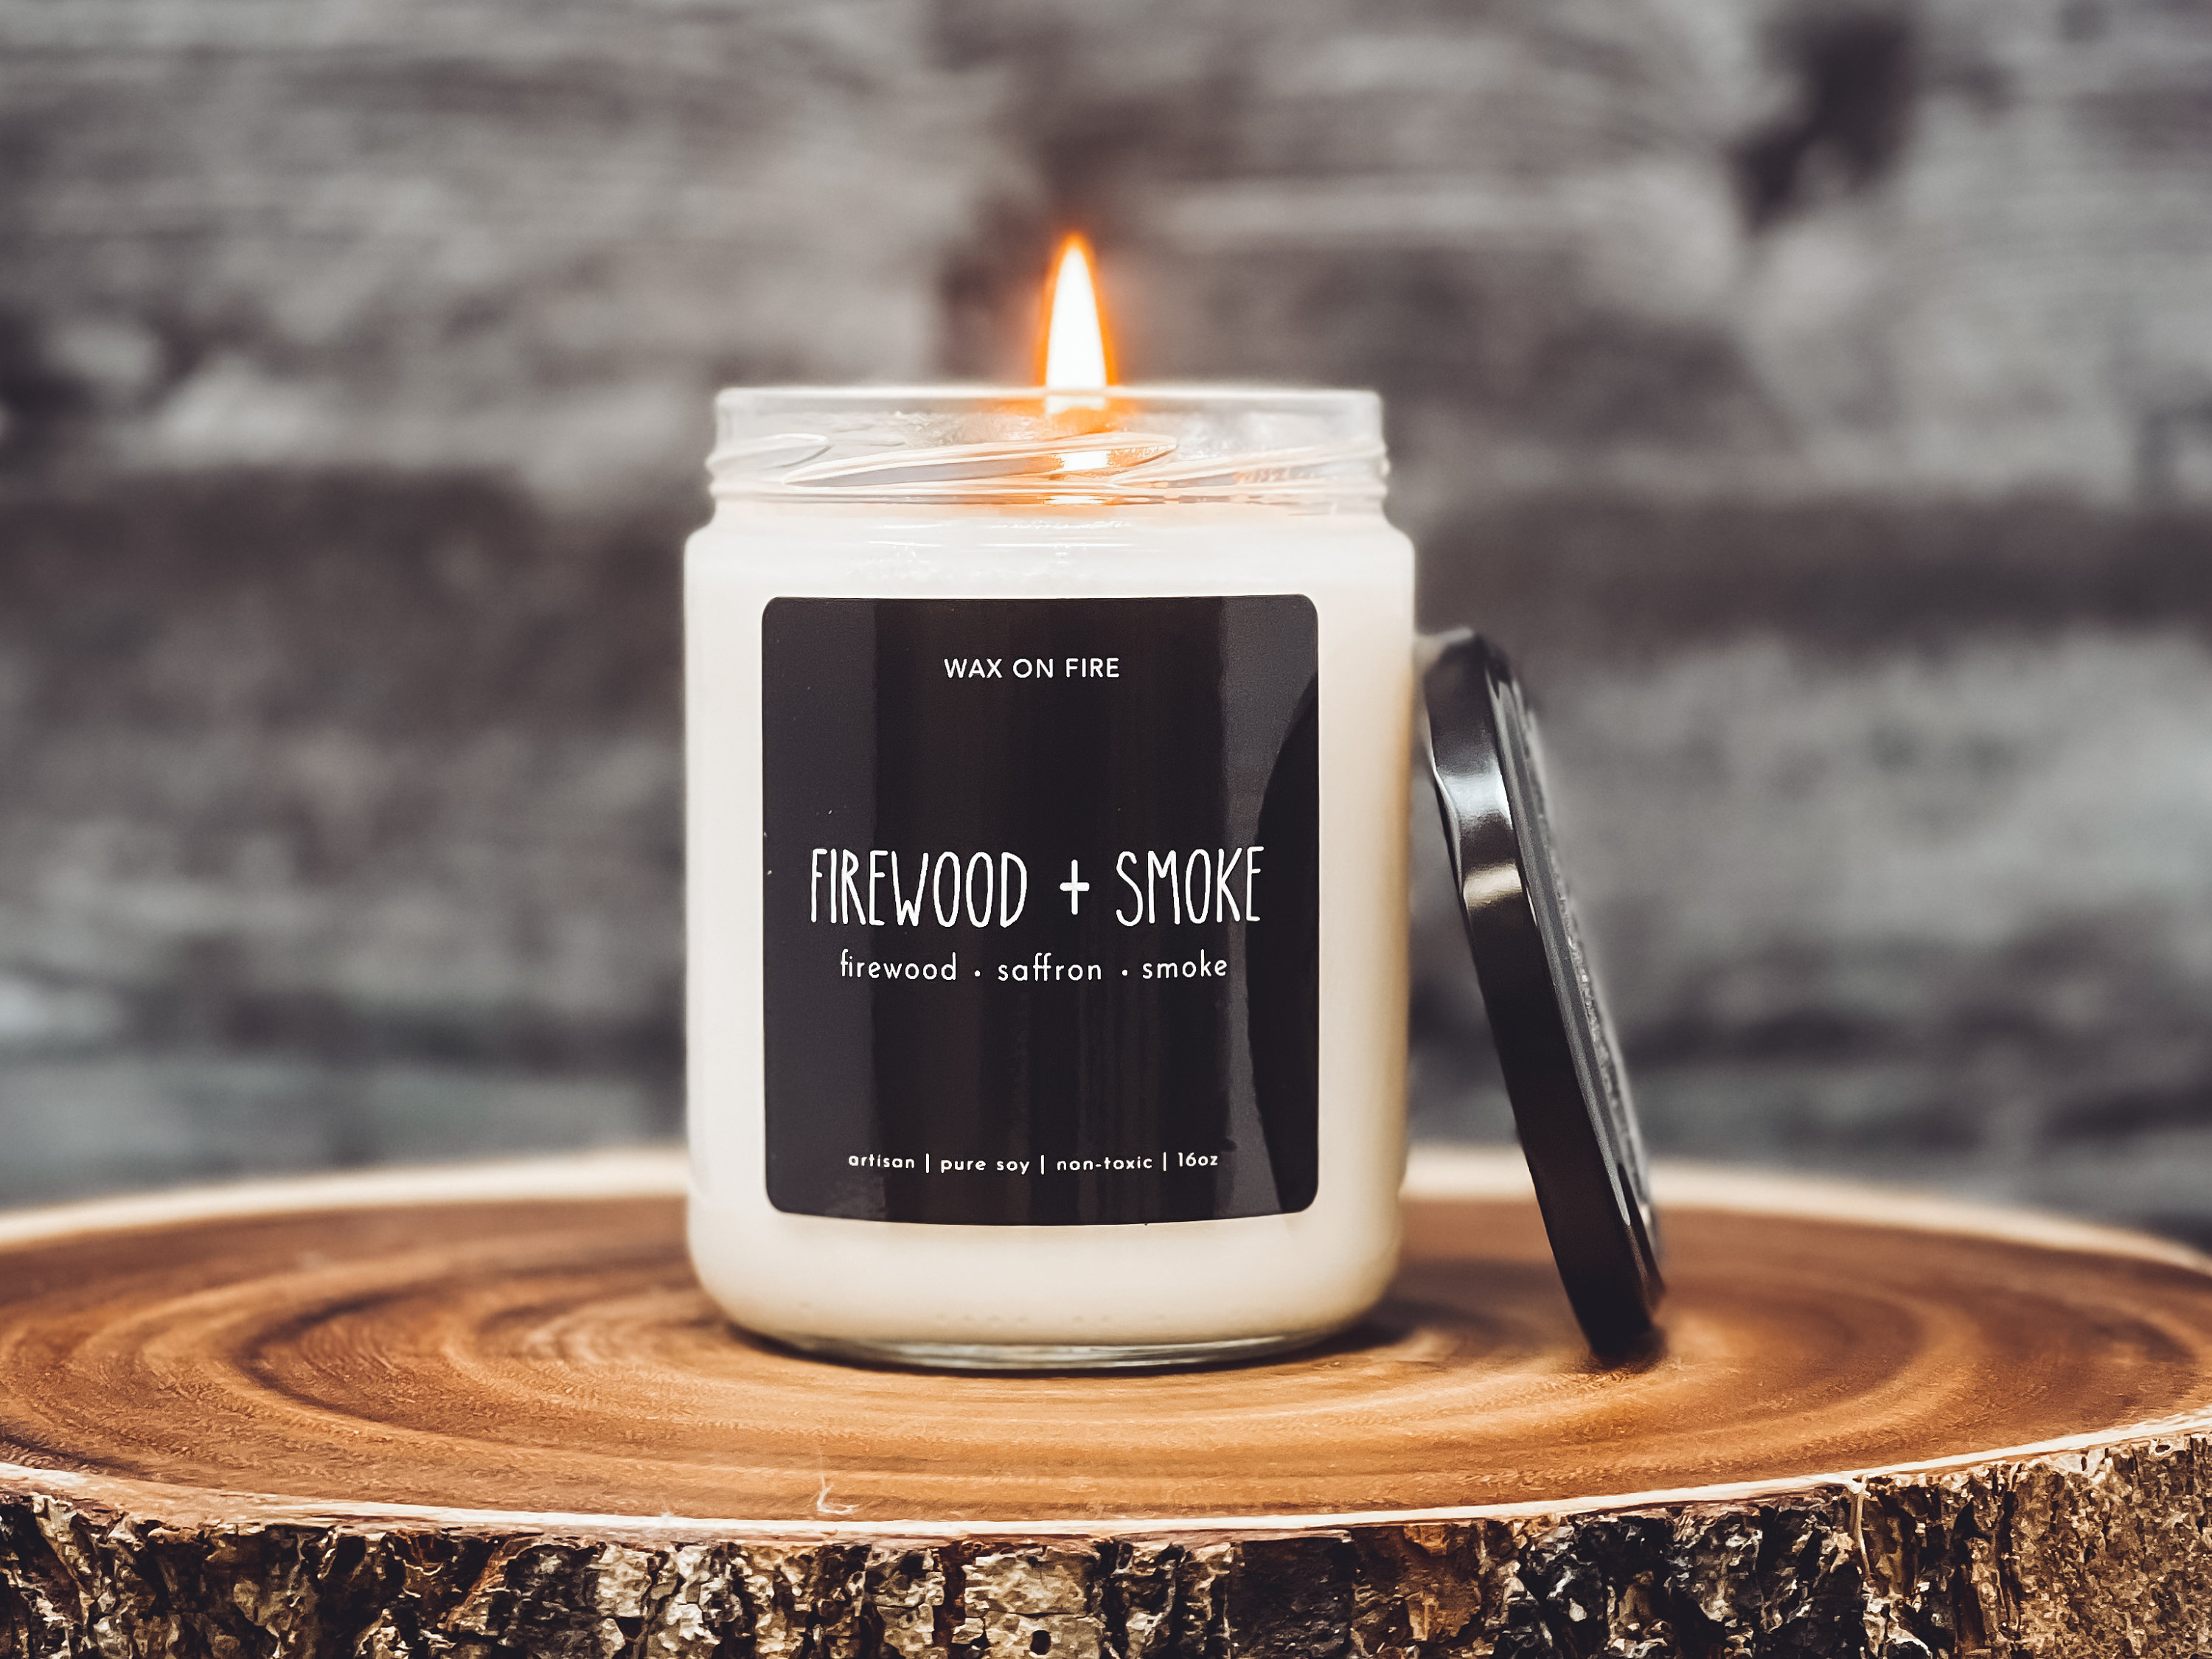 Mahogany and Teakwood Strong Fall and Winter Wood Scented Candle